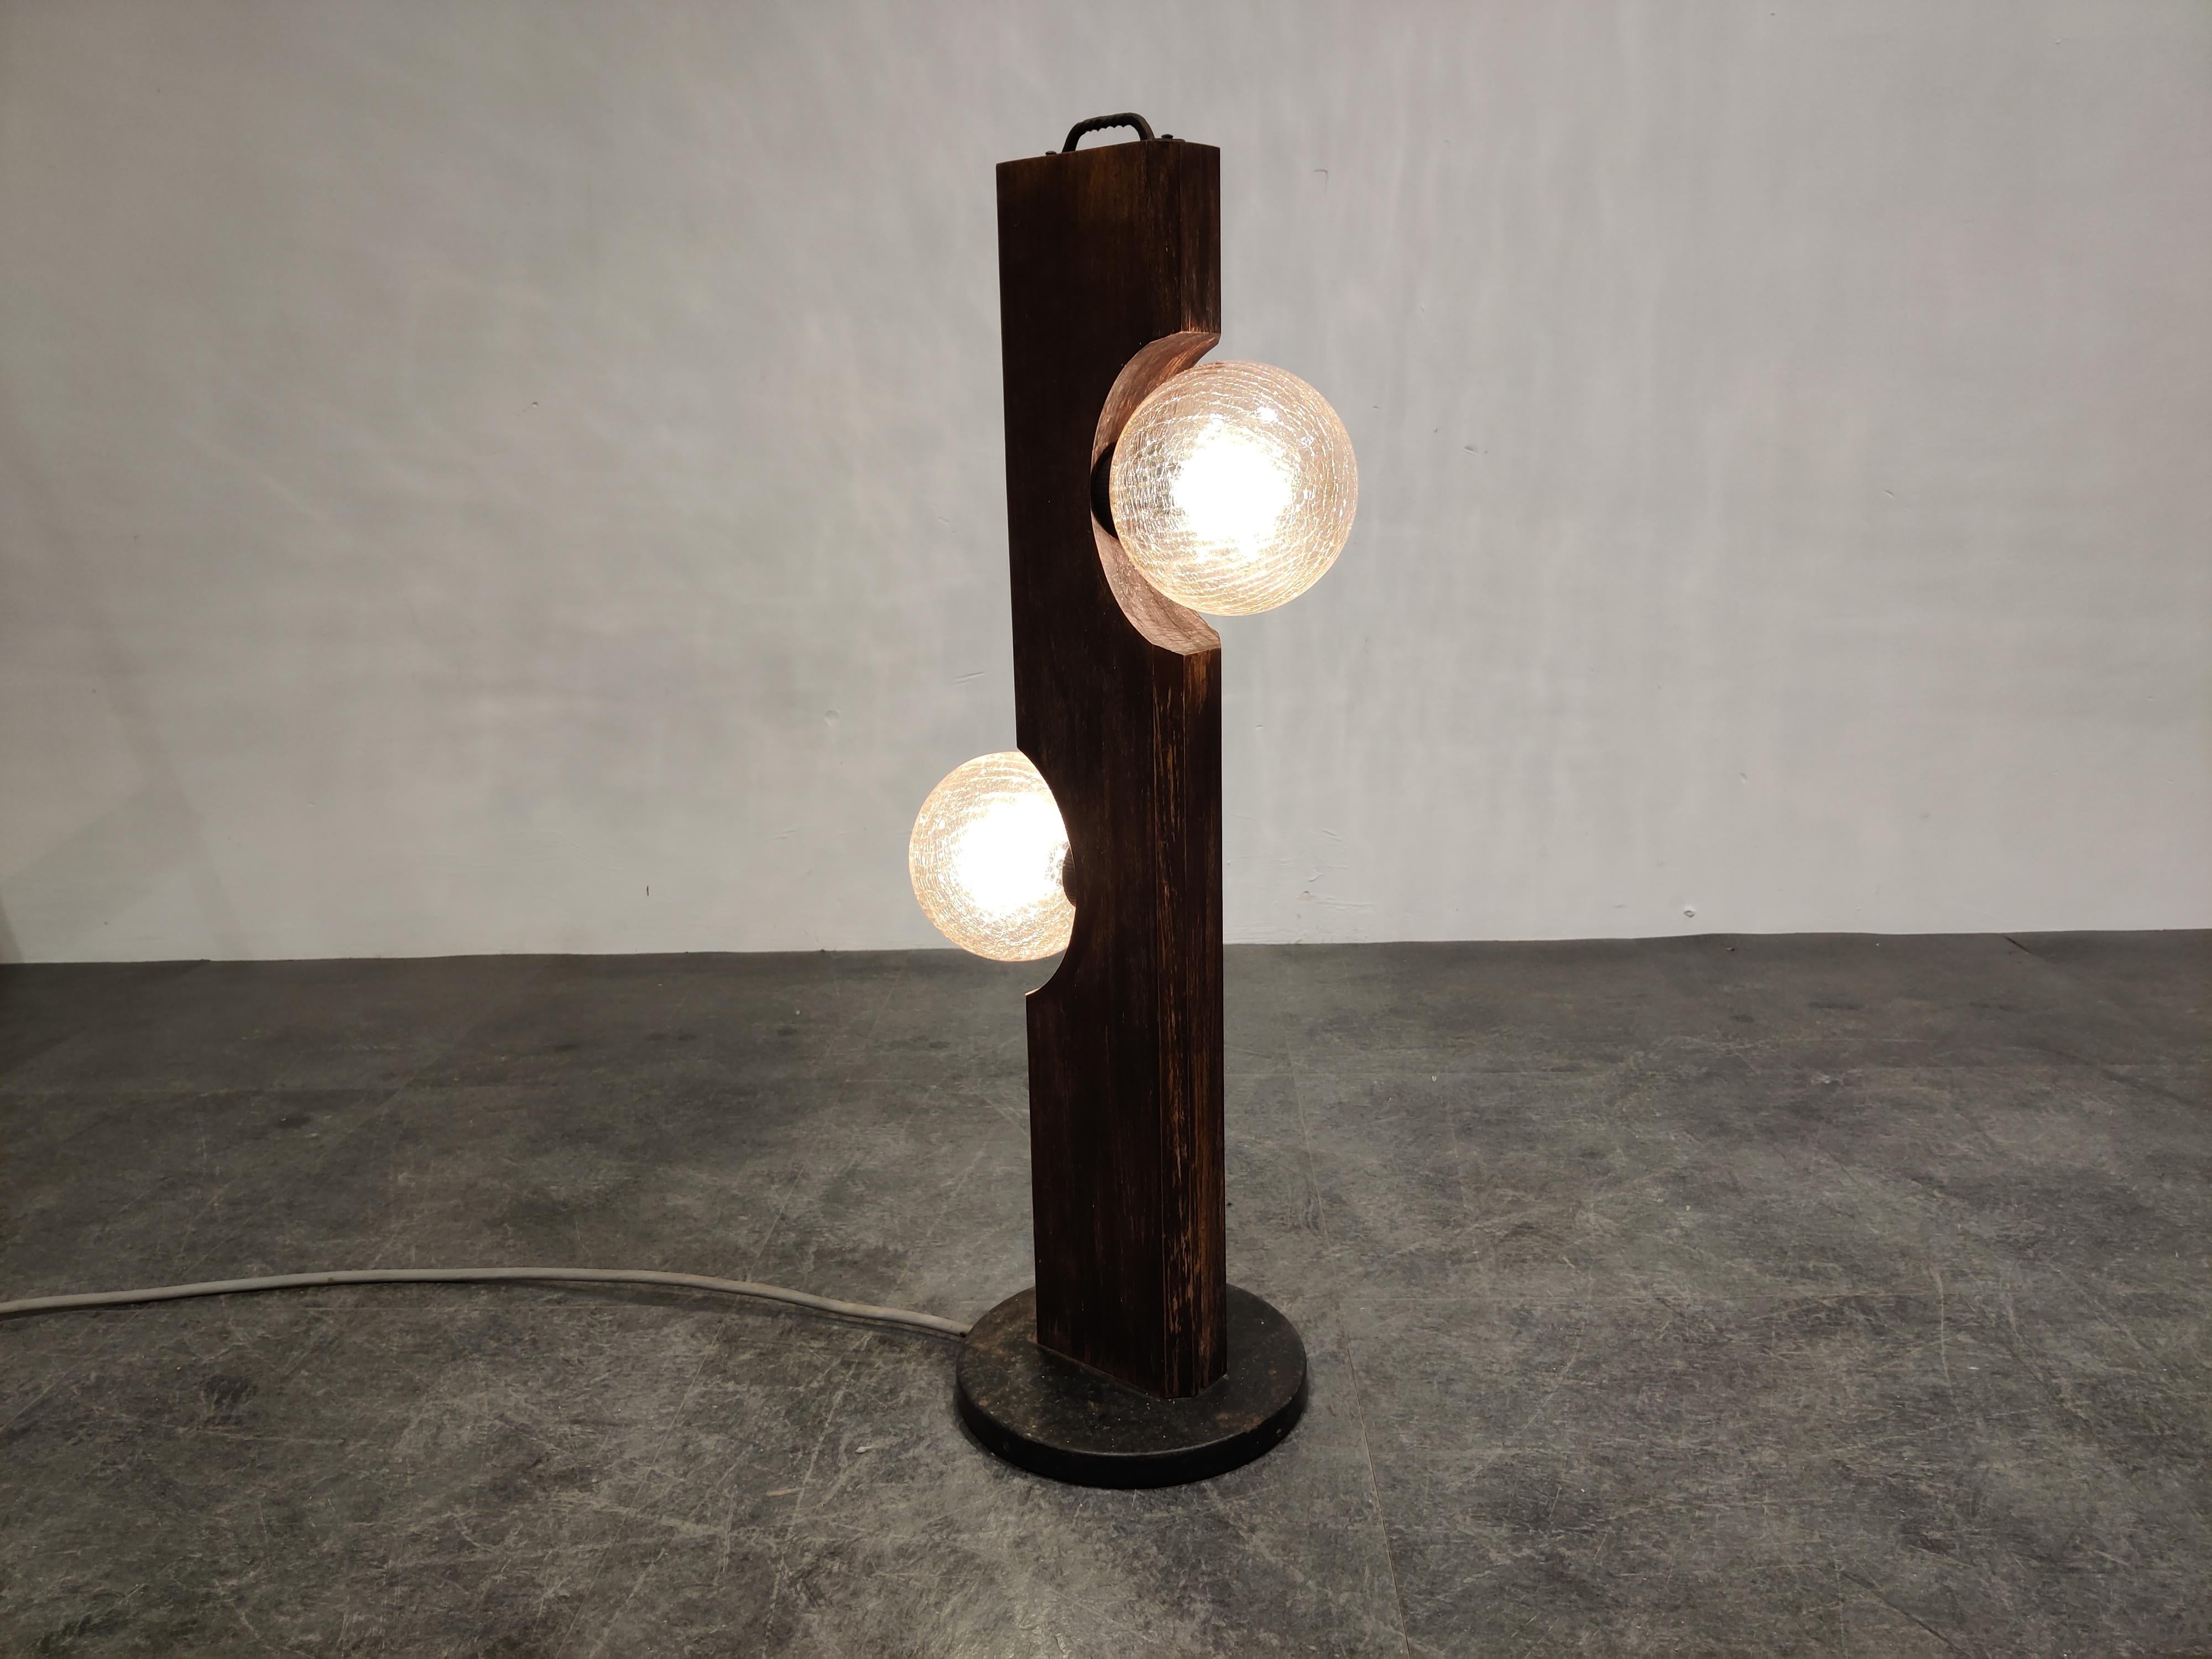 Midcentury floor or table lamp made from maple wood and amber colored glass globes.

Manufactured by Temde Leuchten.

Good condition.

Tested and ready for use with regular E14 light bulbs,

1960s,